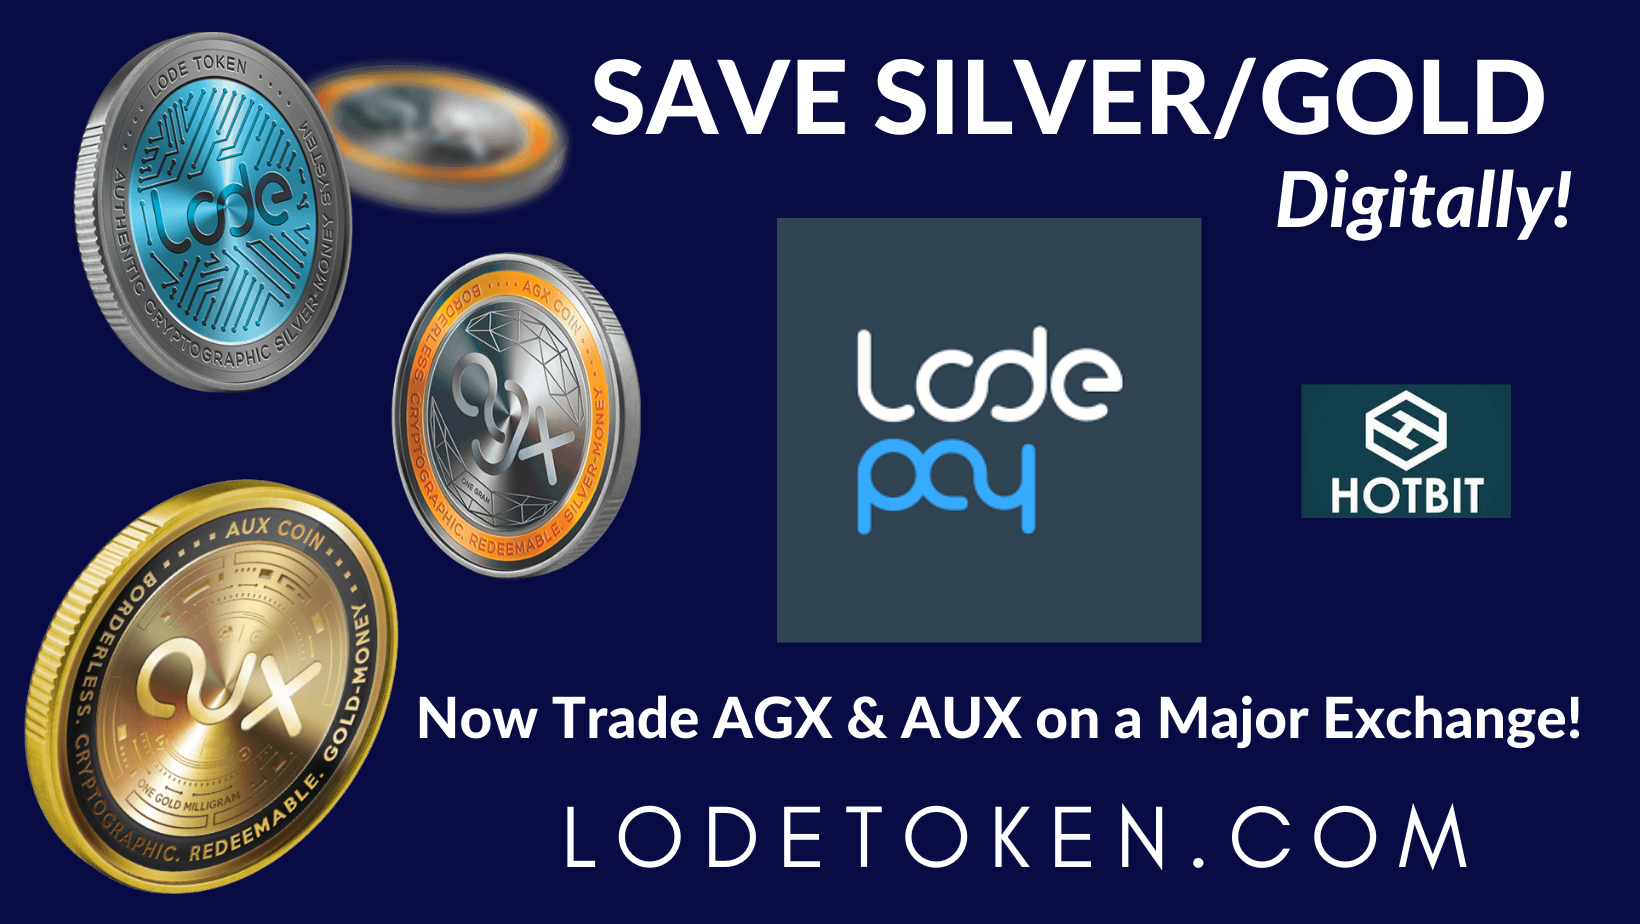 LODE ..SAVE GOLD SILVER DIGITALLY 2.0 - "Best in the West" Chargers Getting Great Praise From Top NFL Analysts